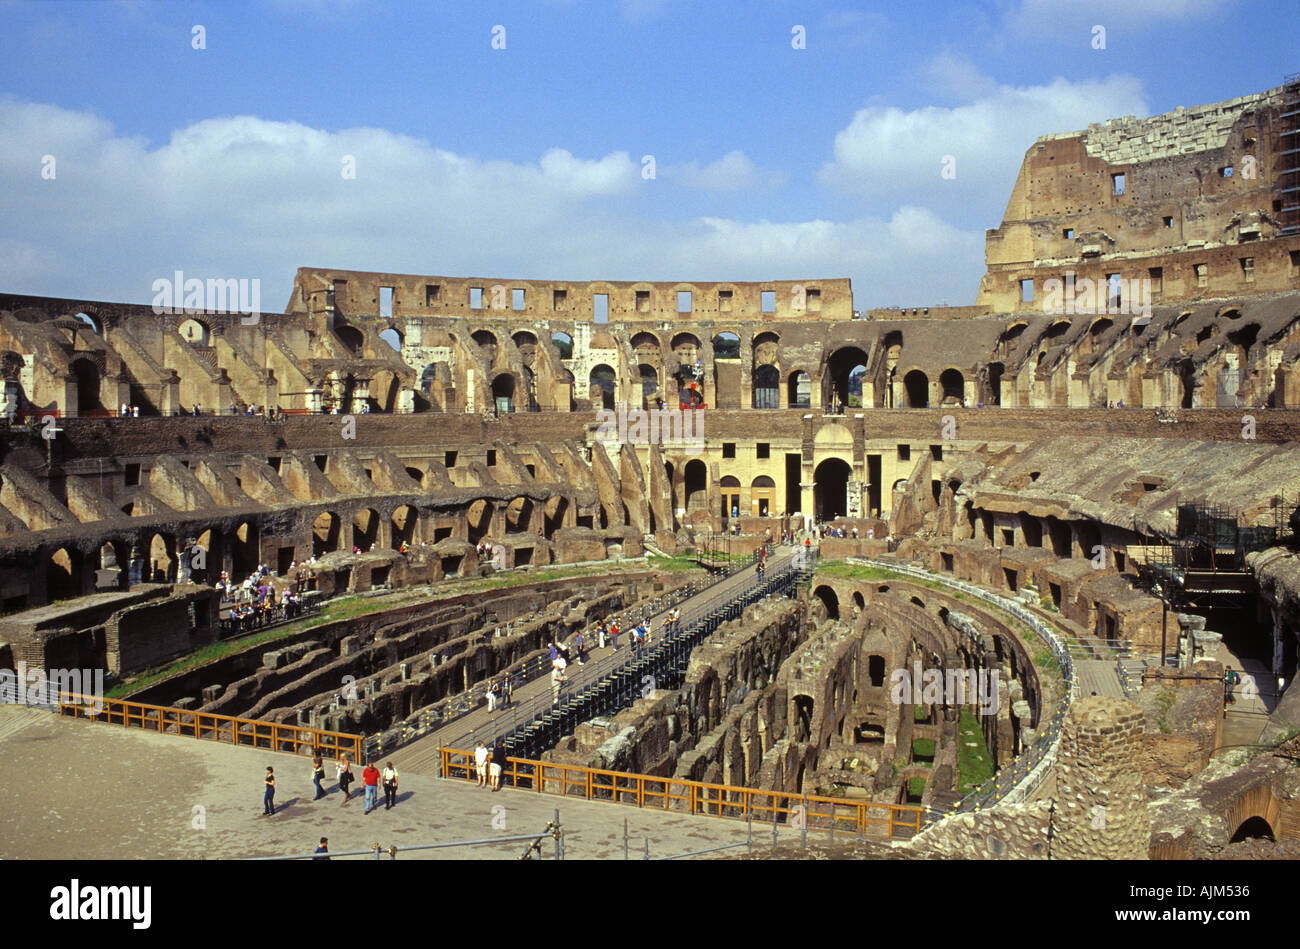 A view of the inside of the ancient Colosseum in Rome Italy Stock Photo